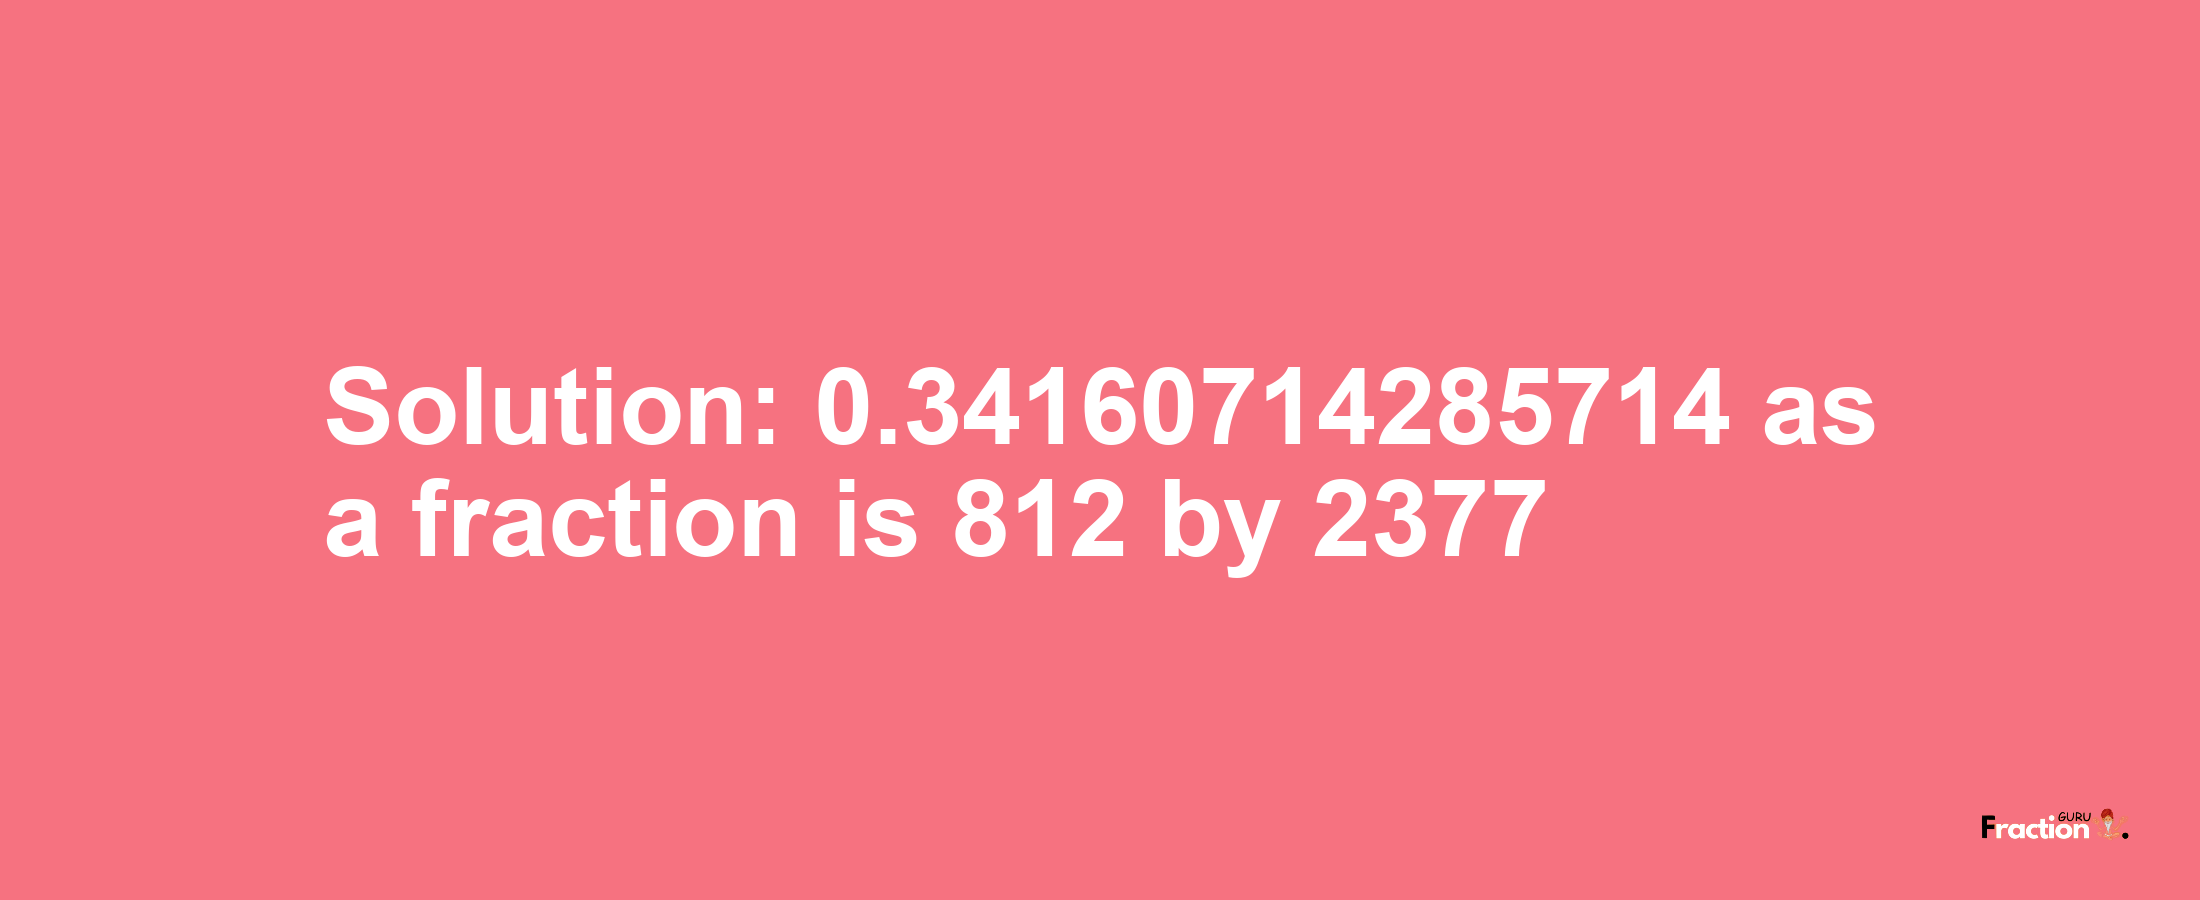 Solution:0.34160714285714 as a fraction is 812/2377